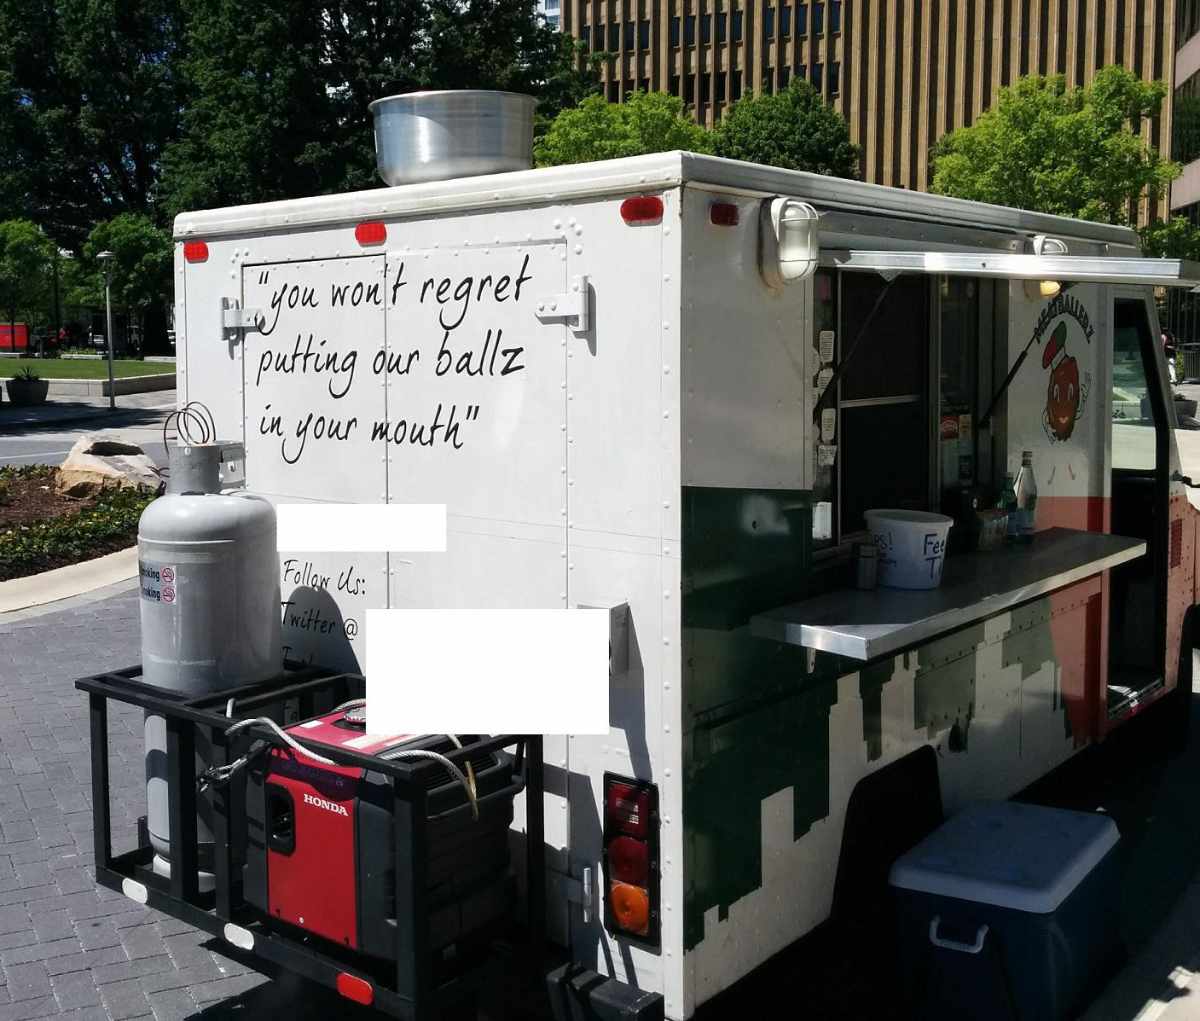 The slogan on this meatball-themed food truck